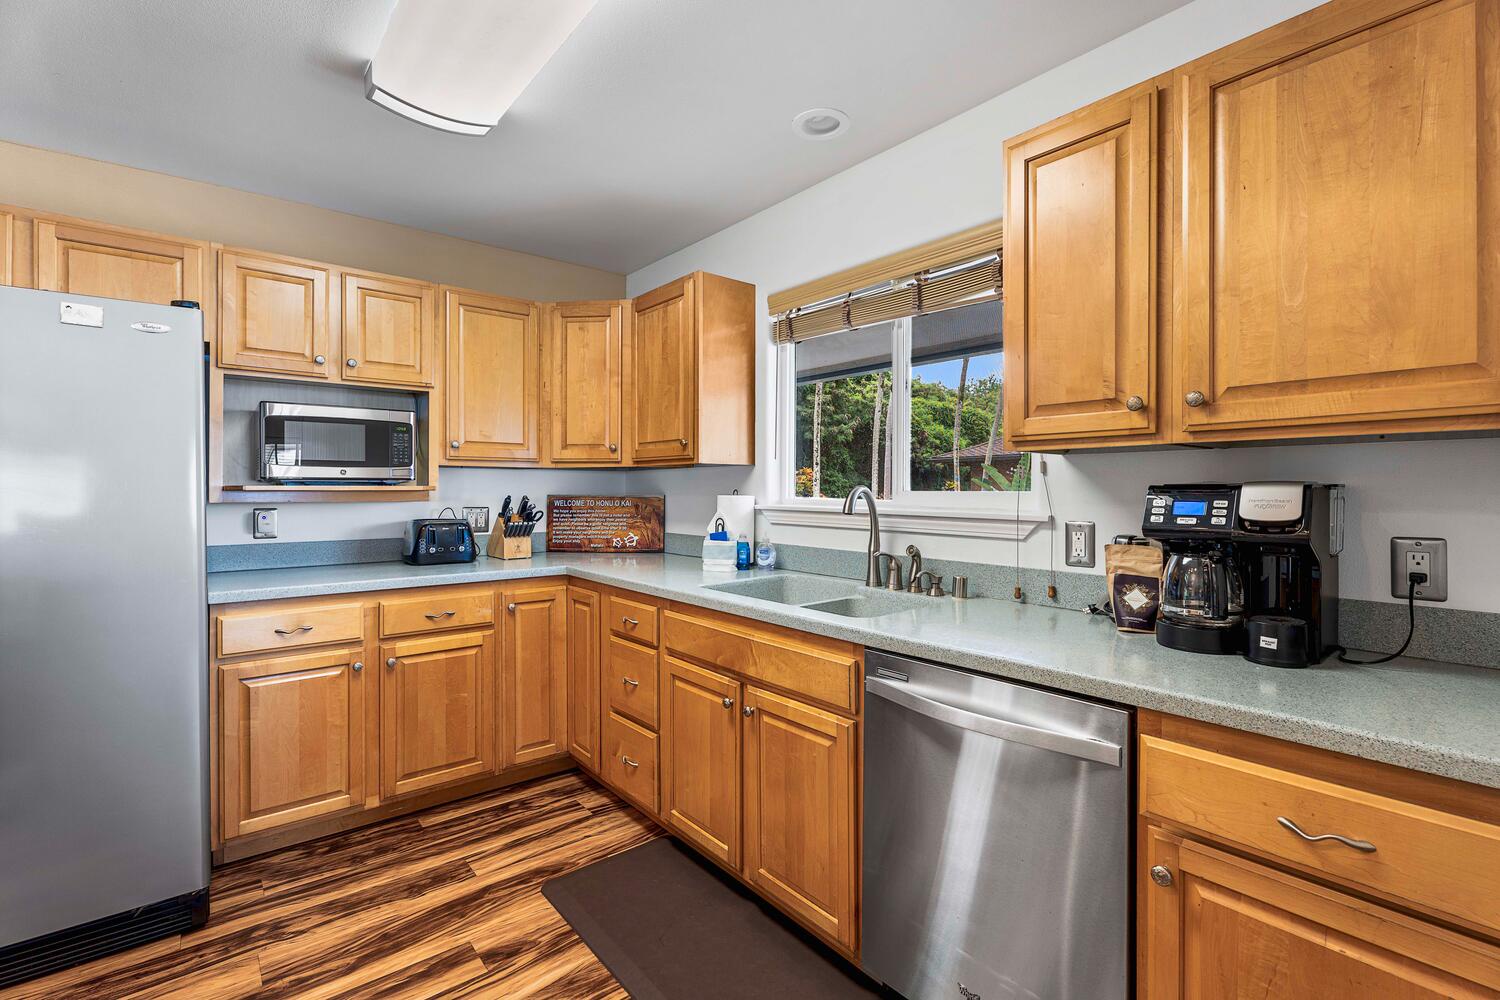 Kailua Kona Vacation Rentals, Honu O Kai (Turtle of the Sea) - The kitchen offers wide counter spaces and plenty of cabinets for storage.